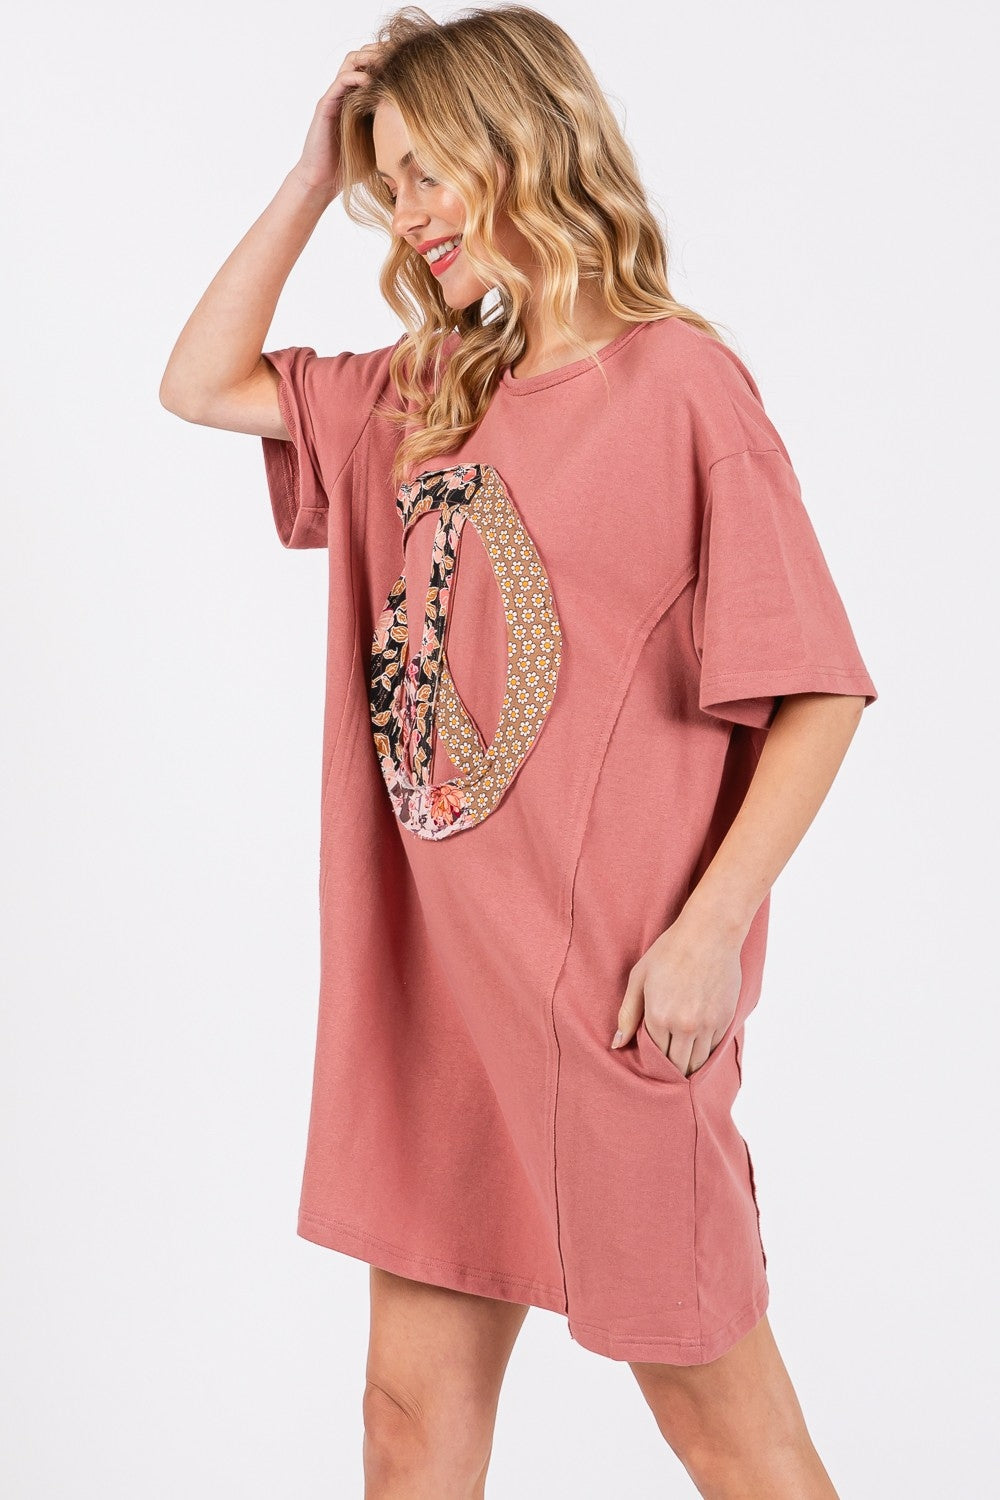 Sunset Vacation Plus Size Peace Sign Applique Short Sleeve Tee Dress Sunset and Swim   